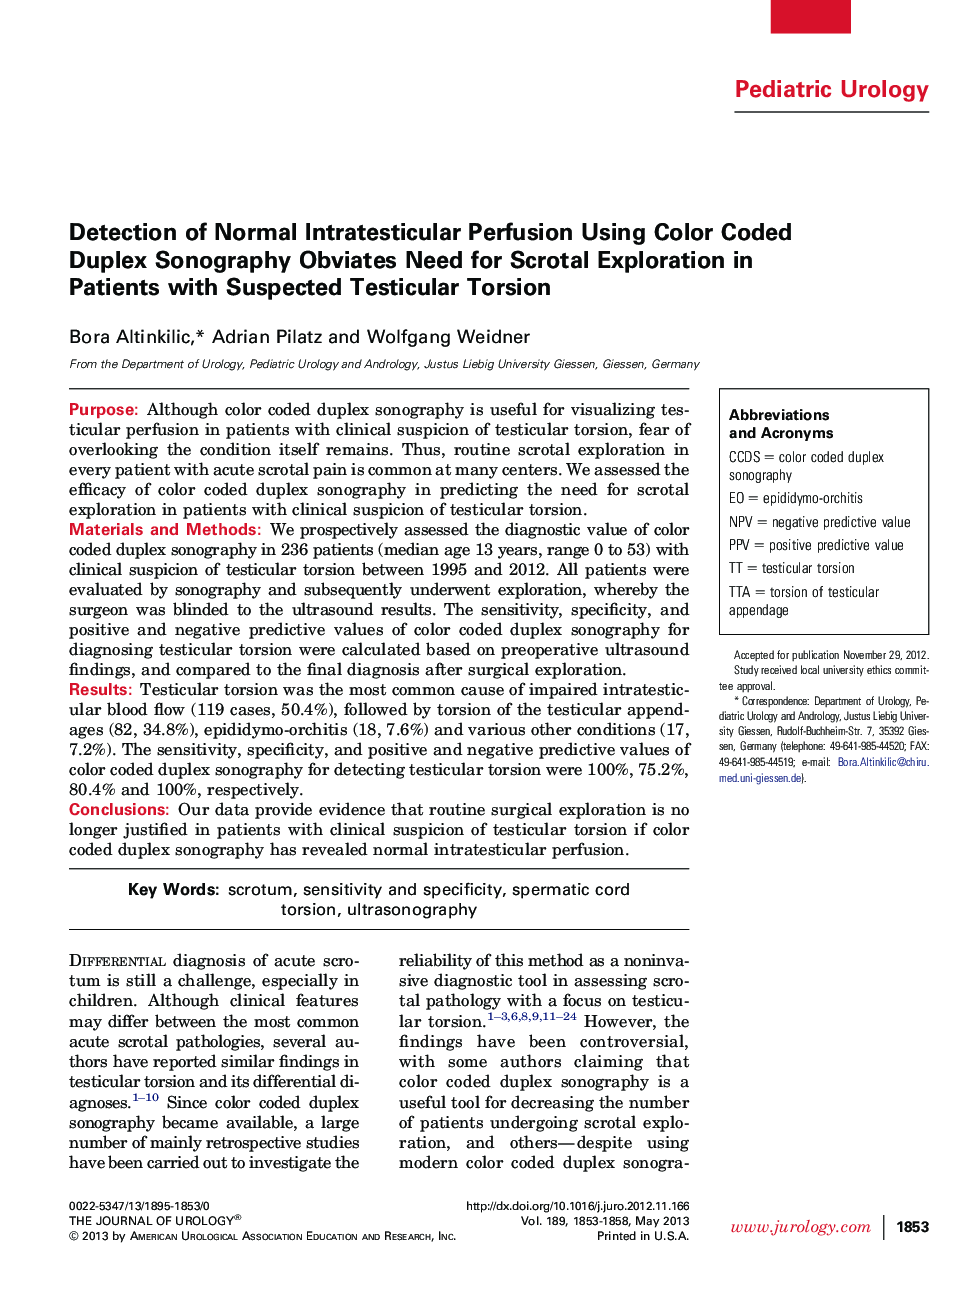 Detection of Normal Intratesticular Perfusion Using Color Coded Duplex Sonography Obviates Need for Scrotal Exploration in Patients with Suspected Testicular Torsion 